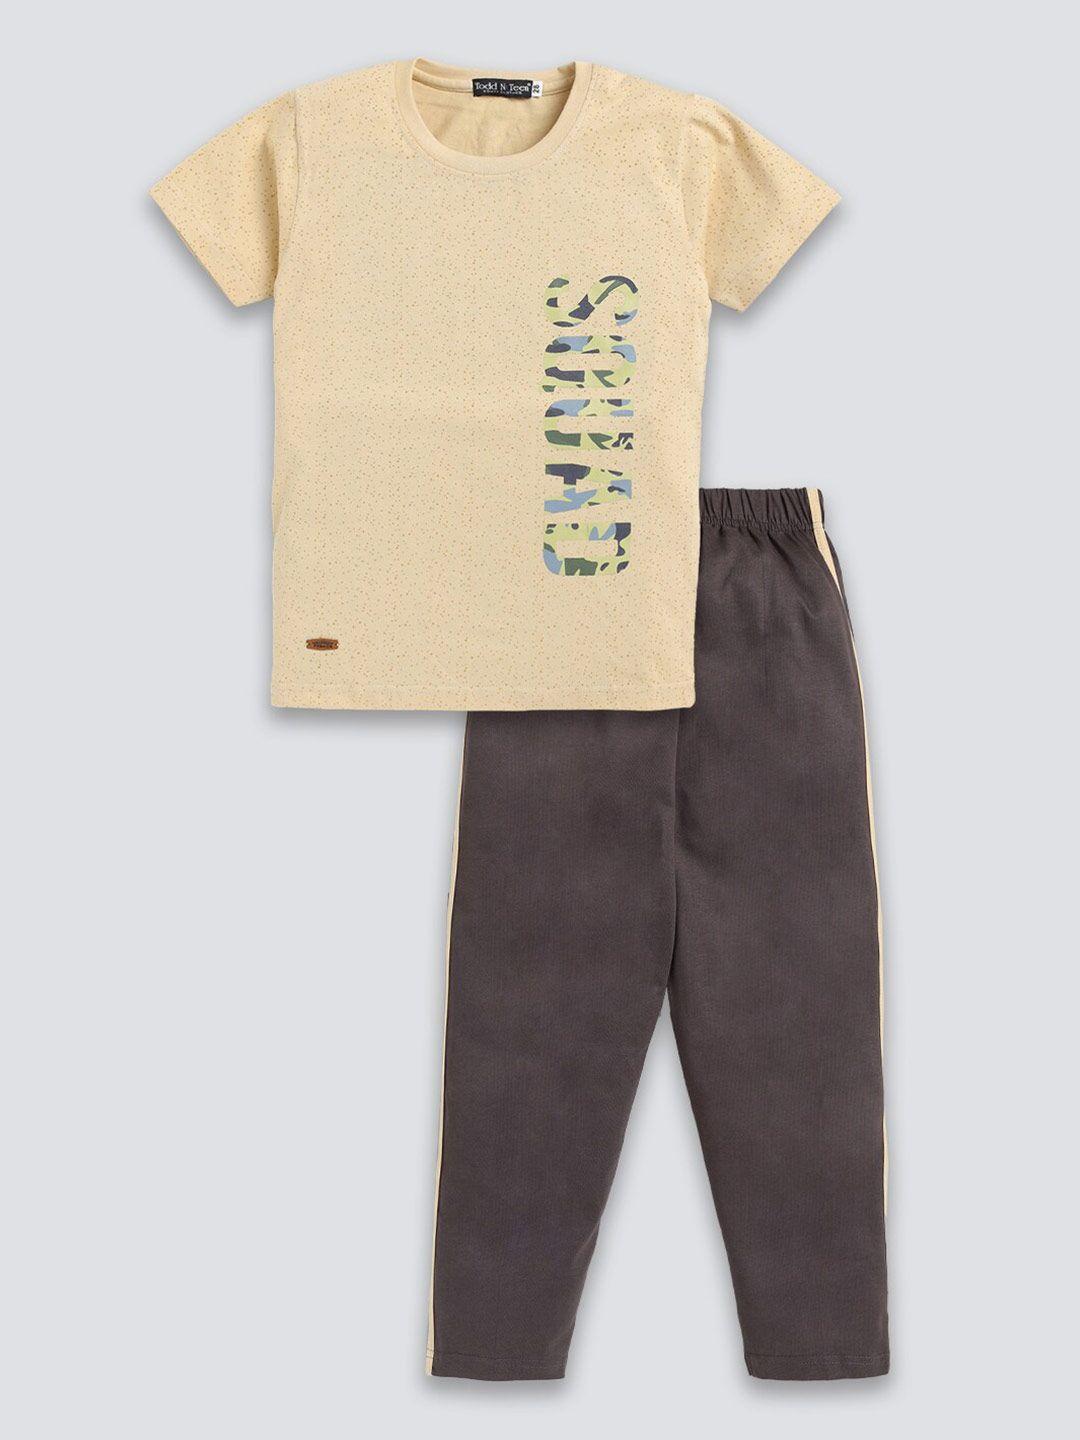 todd n teen boys graphic printed pure cotton t-shirt with trousers